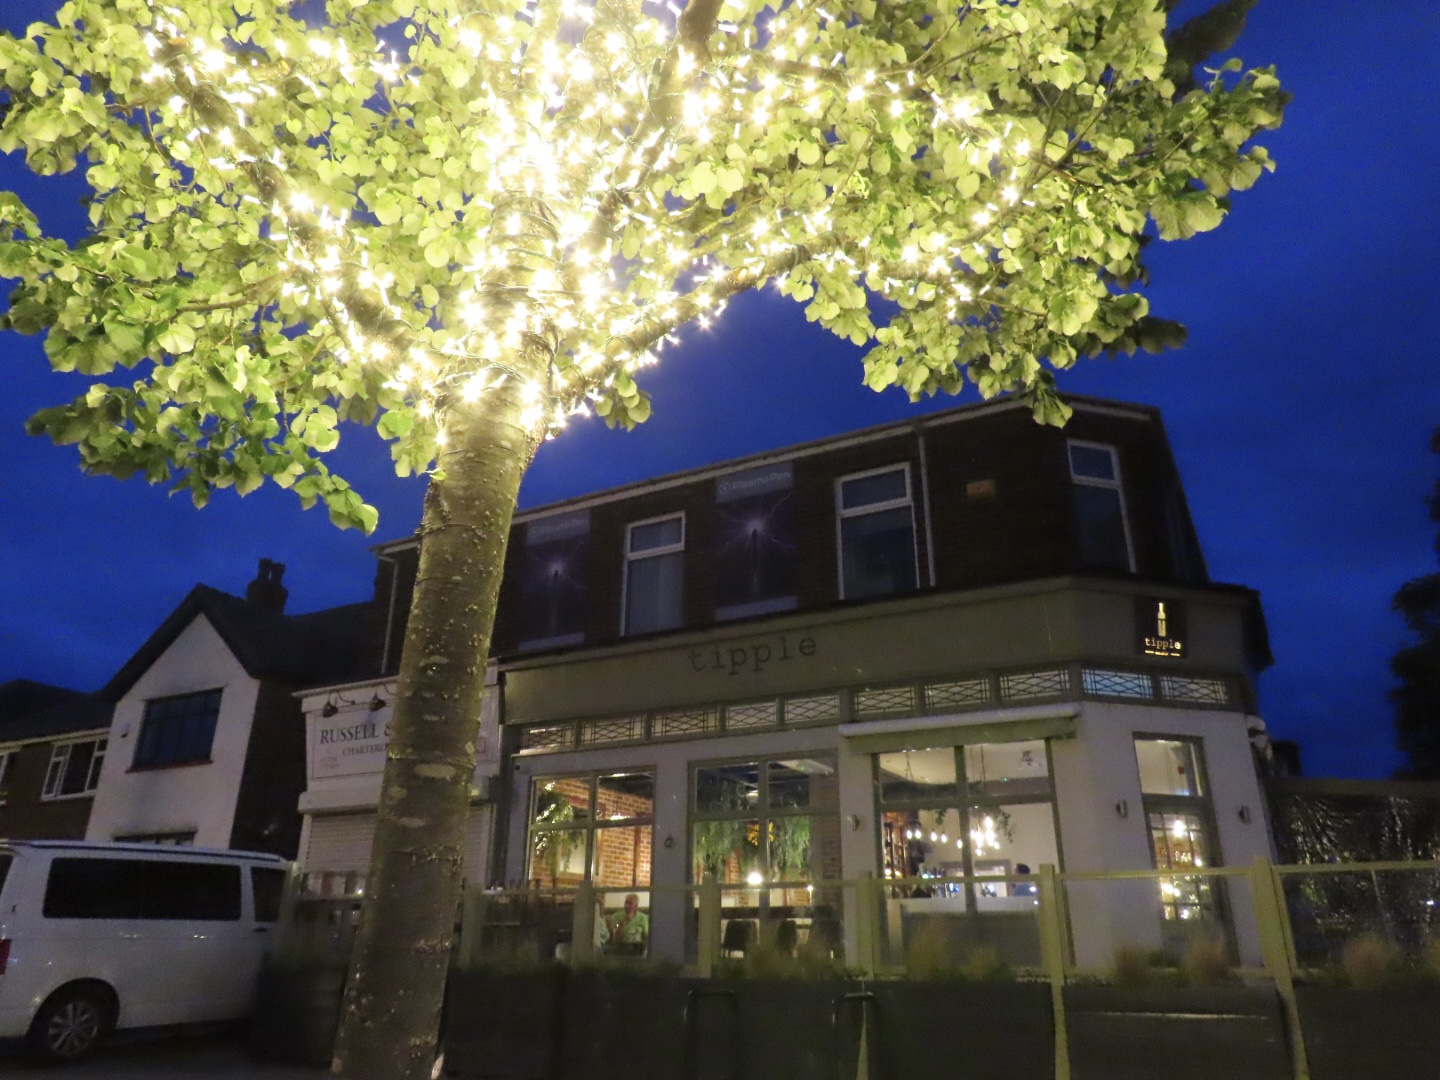 Ainsdale Village in Southport has been lit up with 70,000 new lights thanks to Ainsdale Civic Society and IllumiDex UK Ltd. The lights outside Tipple bar in Ainsdale. Photo by Andrew Brown Media